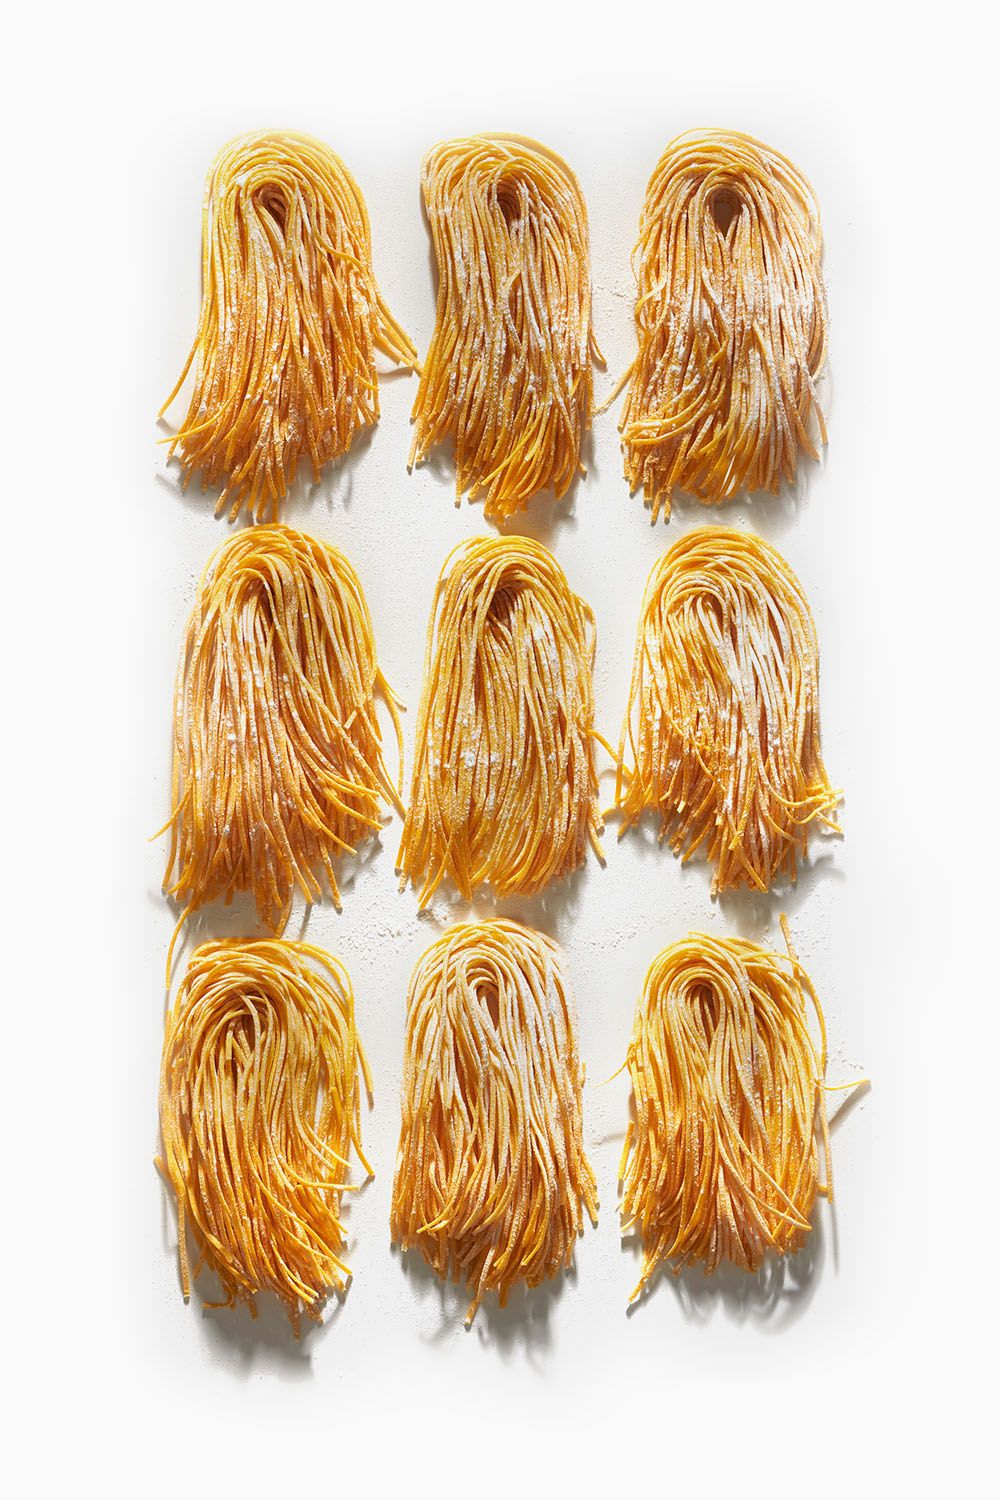 Fresh handmade pasta composition prepared by chef Marcello Passoni from Cucina Nomade